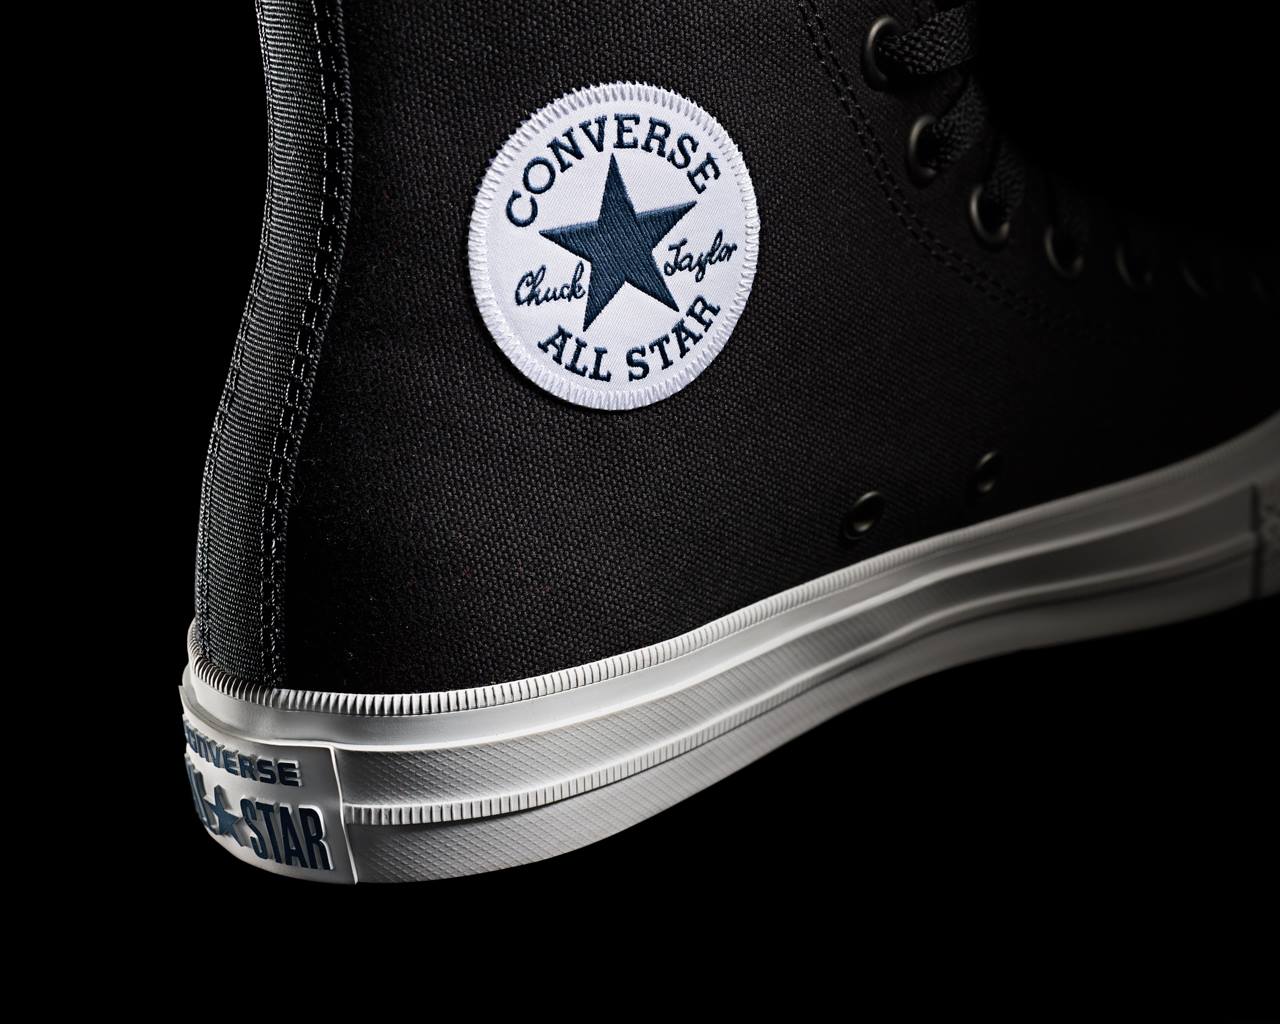 difference converse homme et femme